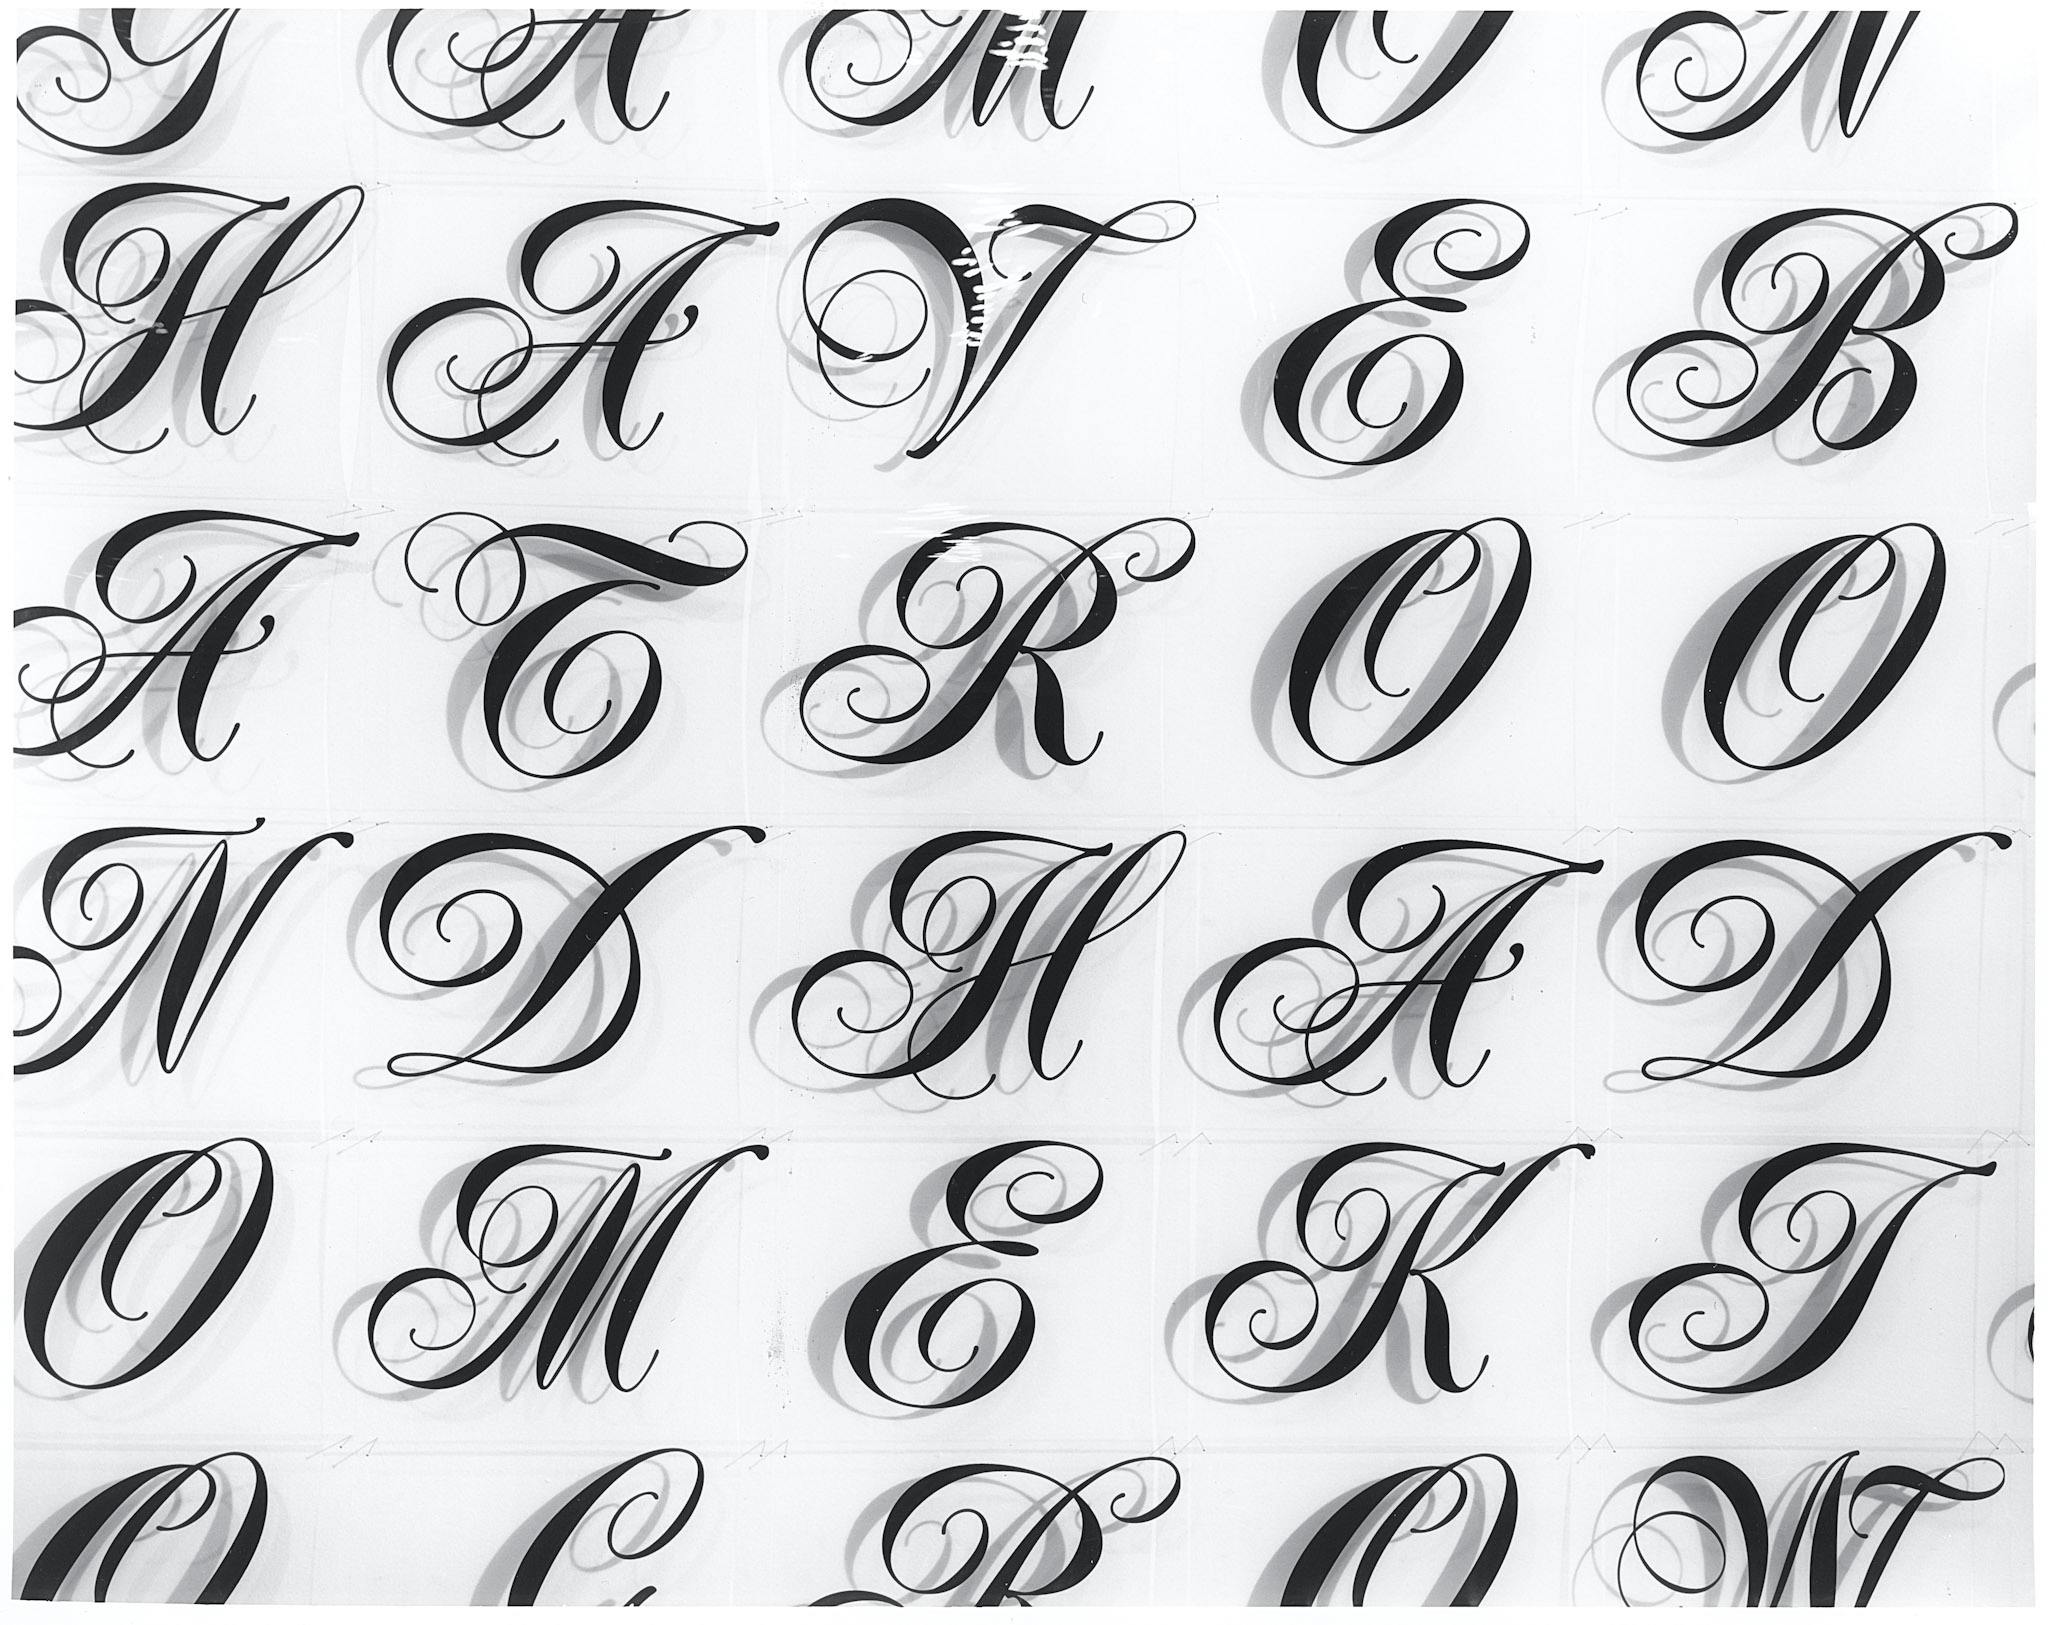 A closeup of several cursive capital letters. The letters are printed on clear plastic film and pasted on white walls, creating repeating shadows that replicate their curves and details.